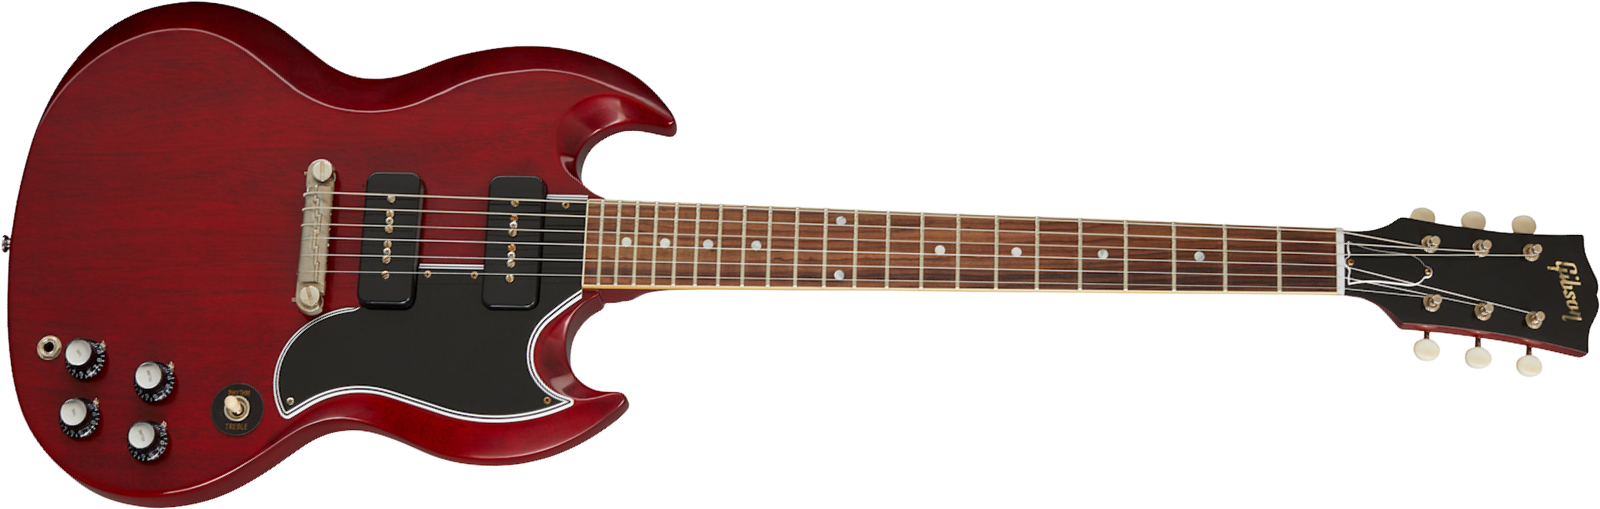 Gibson Custom Shop Sg Special 1963 Reissue 2p90 Ht Rw - Vos Cherry Red - Double cut electric guitar - Main picture